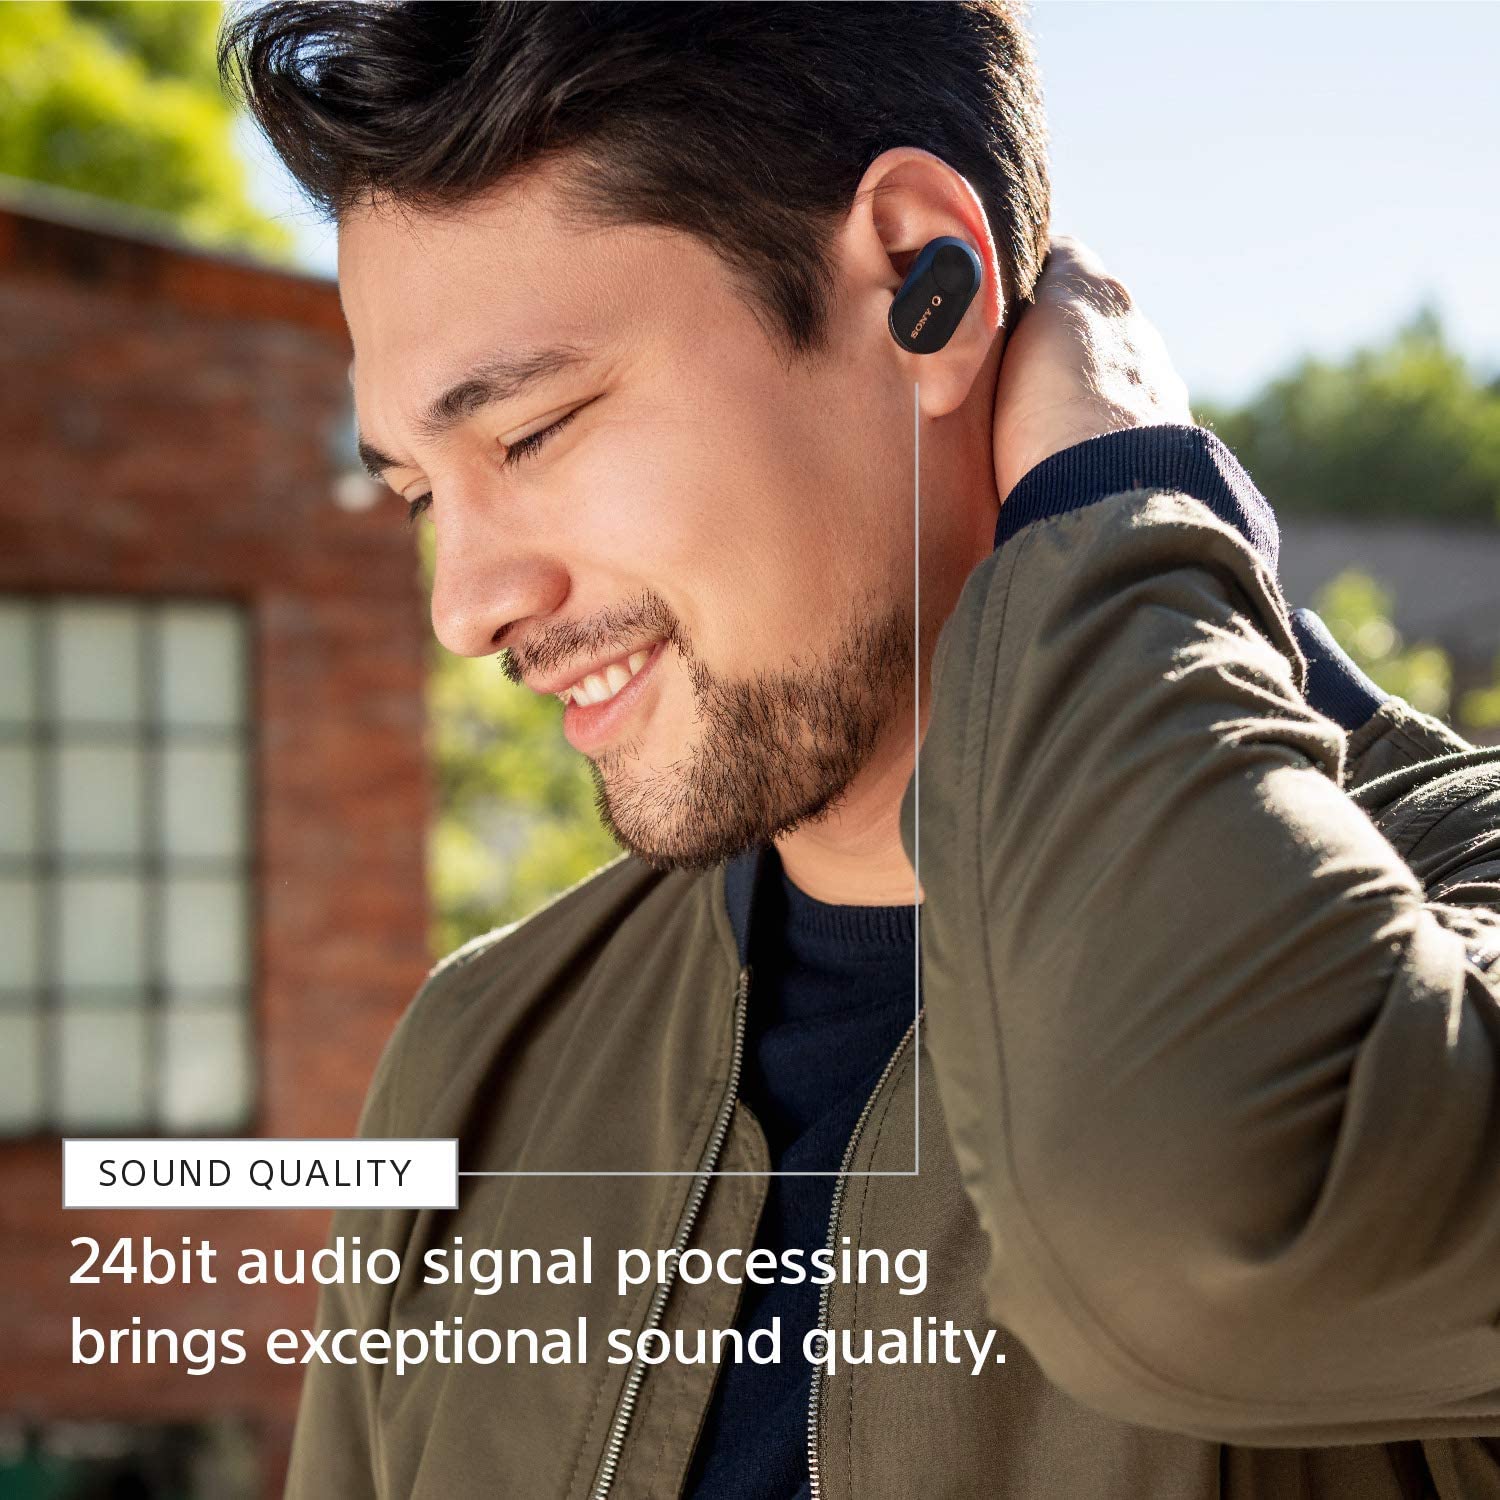 Sony WF-1000XM3 Industry Leading Noise Canceling Truly Wireless Earbuds  Headset/Headphones with Alexa Voice Control And Mic For Phone Call, Silver